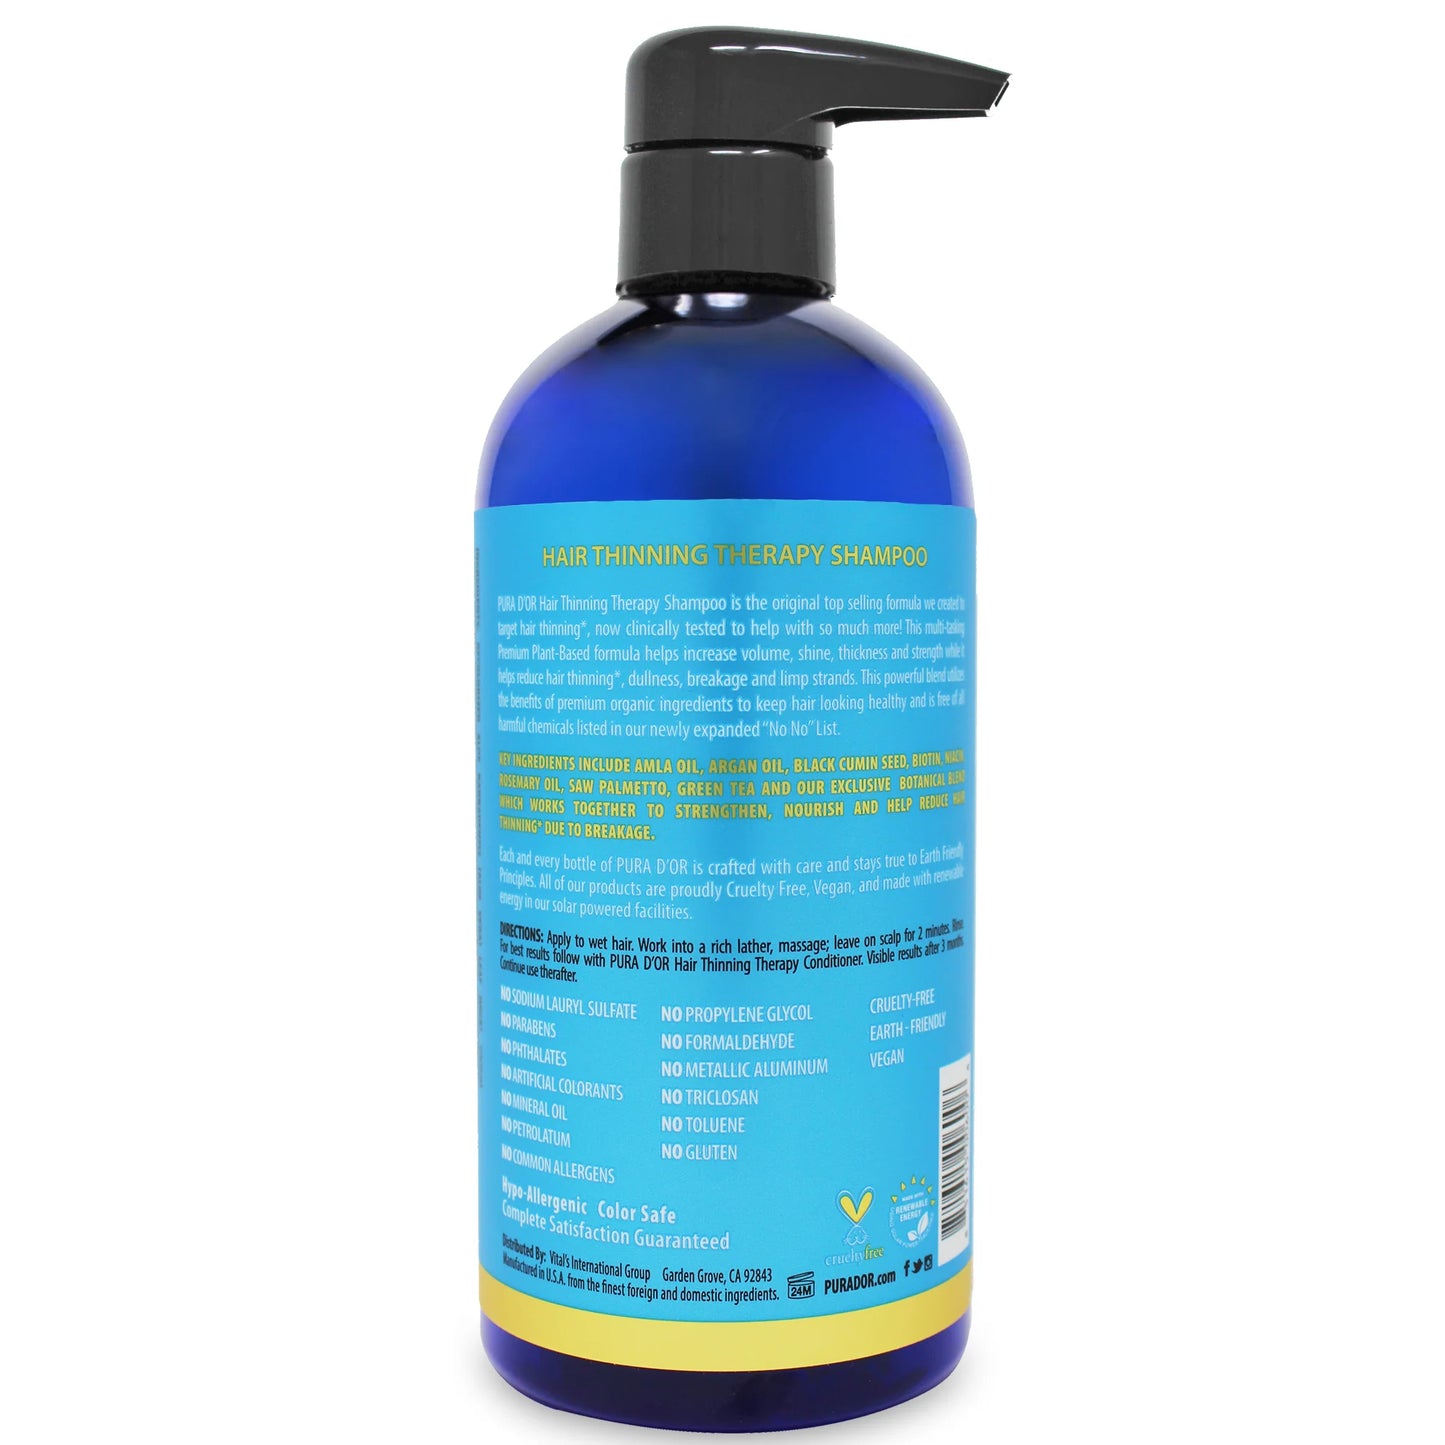 Hair Thinning Therapy Shampoo